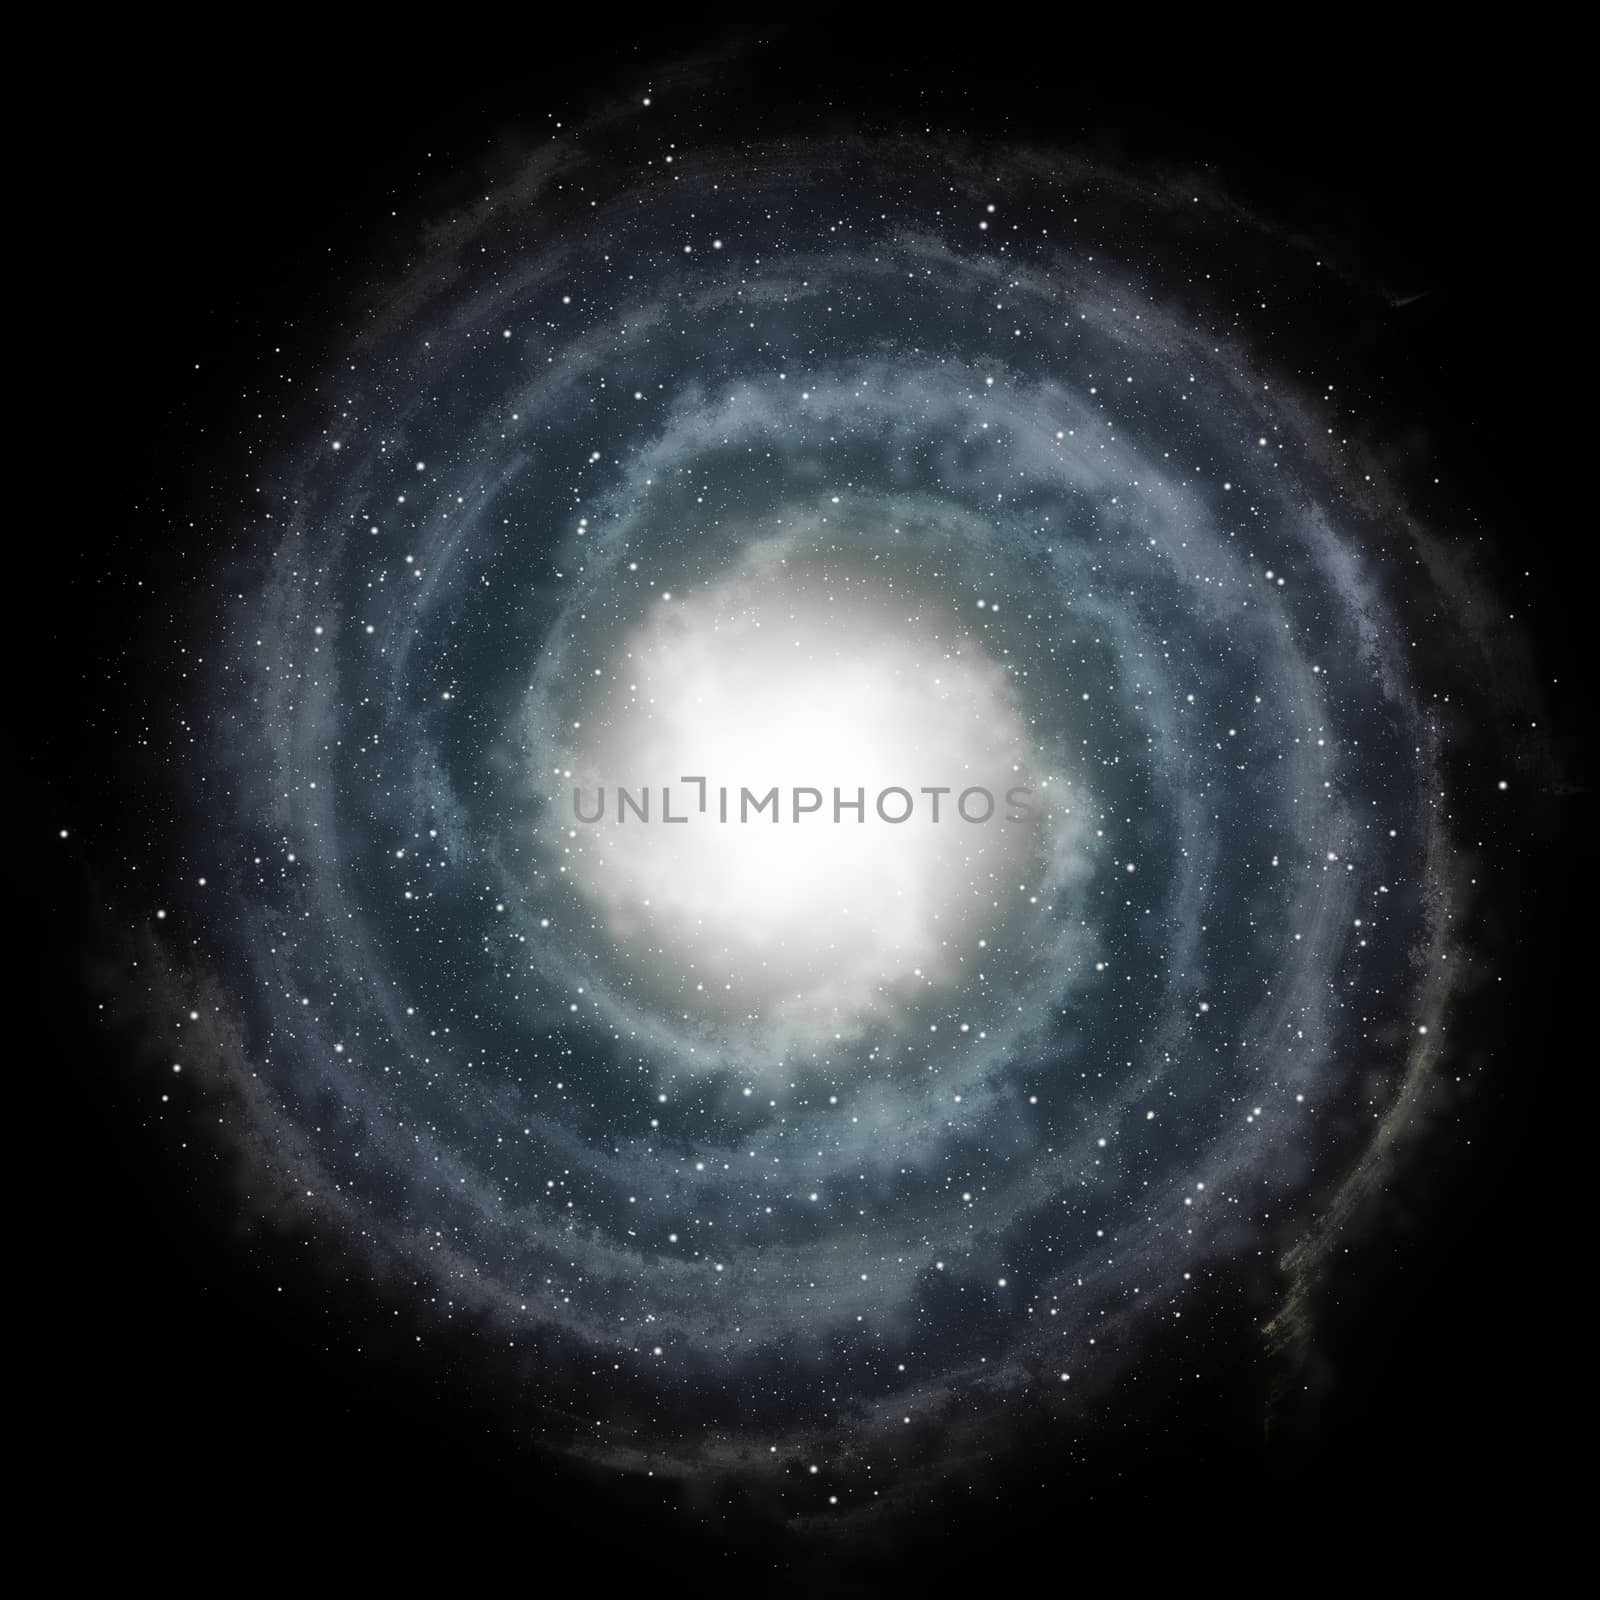 Blue spiral galaxy against black space and stars in deep outer space